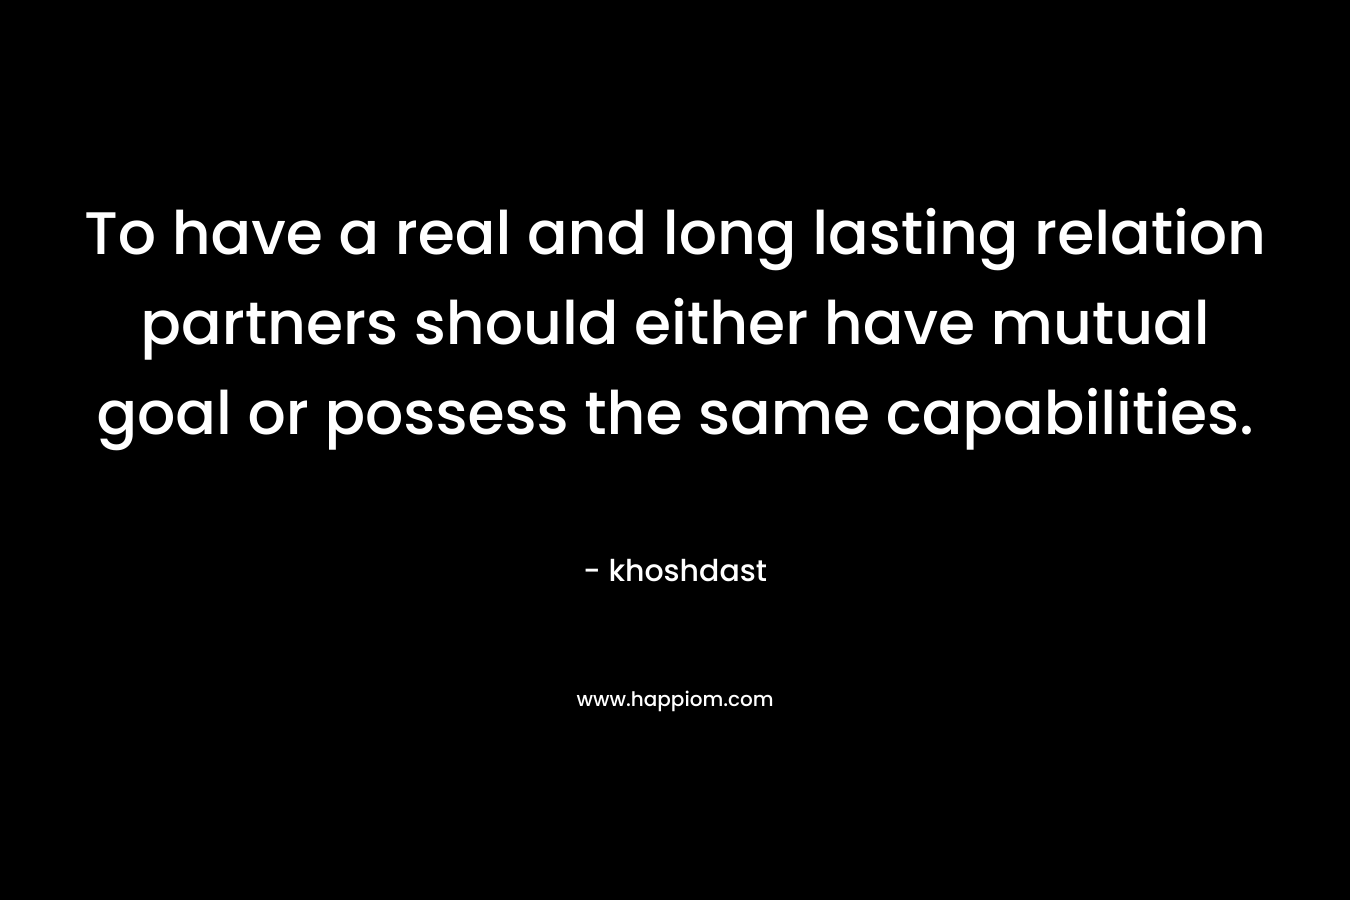 To have a real and long lasting relation partners should either have mutual goal or possess the same capabilities.